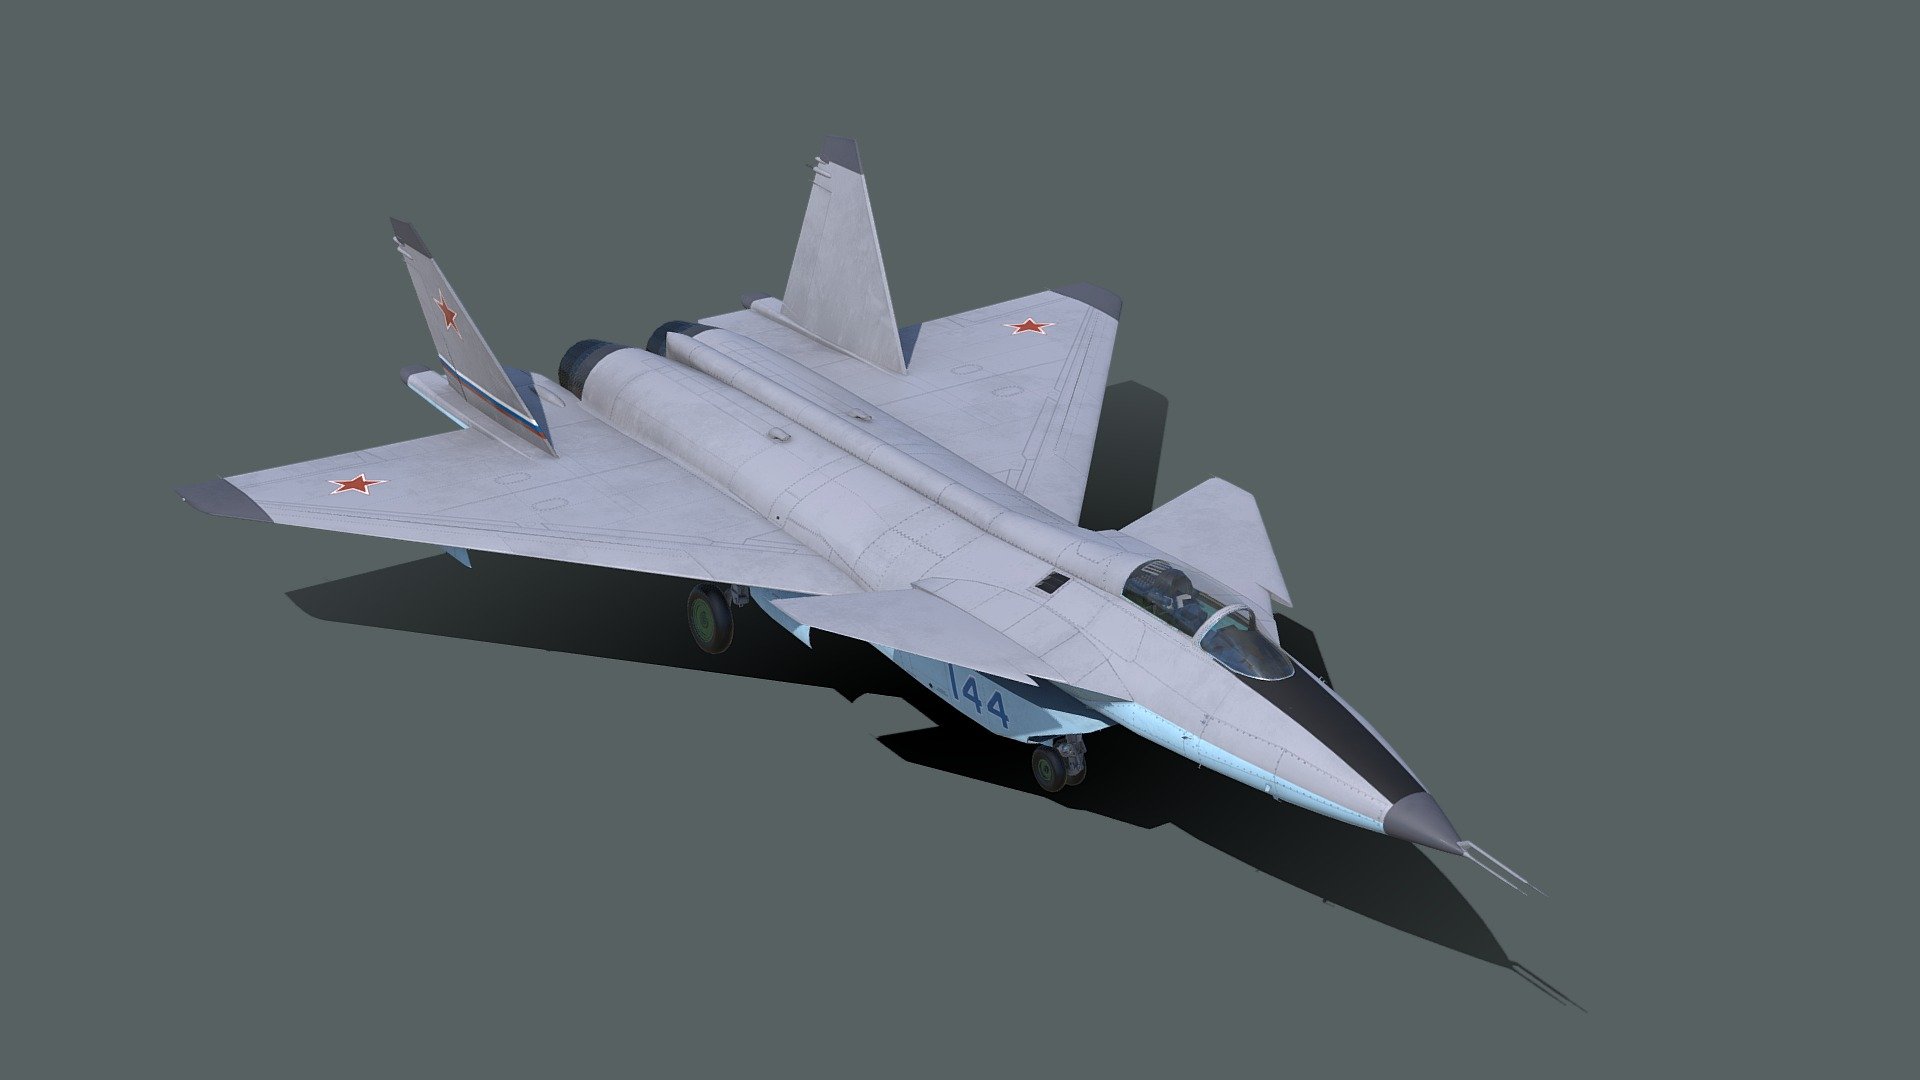 The Mikoyan Project 1.44/1.42 (Russian: Микоян МиГ-1.44; NATO reporting name: Flatpack) was a technology demonstrator developed by the Mikoyan design bureau. It was the Soviet Union's answer to the U.S.'s Advanced Tactical Fighter (ATF), incorporating many fifth-generation jet fighter aspects such as advanced avionics, stealth technology, supermaneuverability, and supercruise. The design's development was a protracted one, characterised by repeated and lengthy postponements due to a chronic lack of funds; the MiG 1.44 made its maiden flight in February 2000 3d model